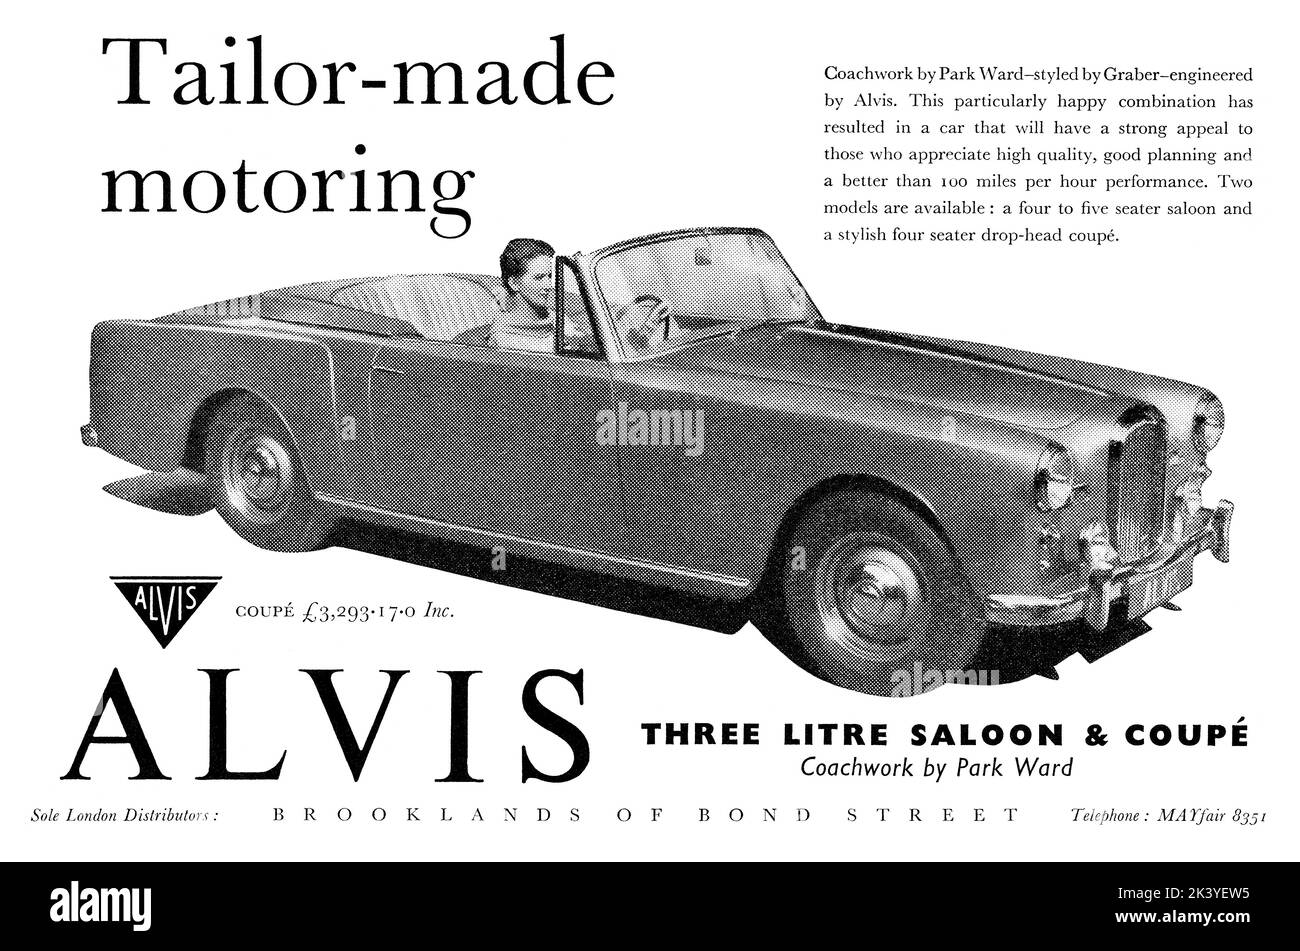 1959 British advertisement for the Alvis Three Litre Saloon and Coupé motor car. Stock Photo